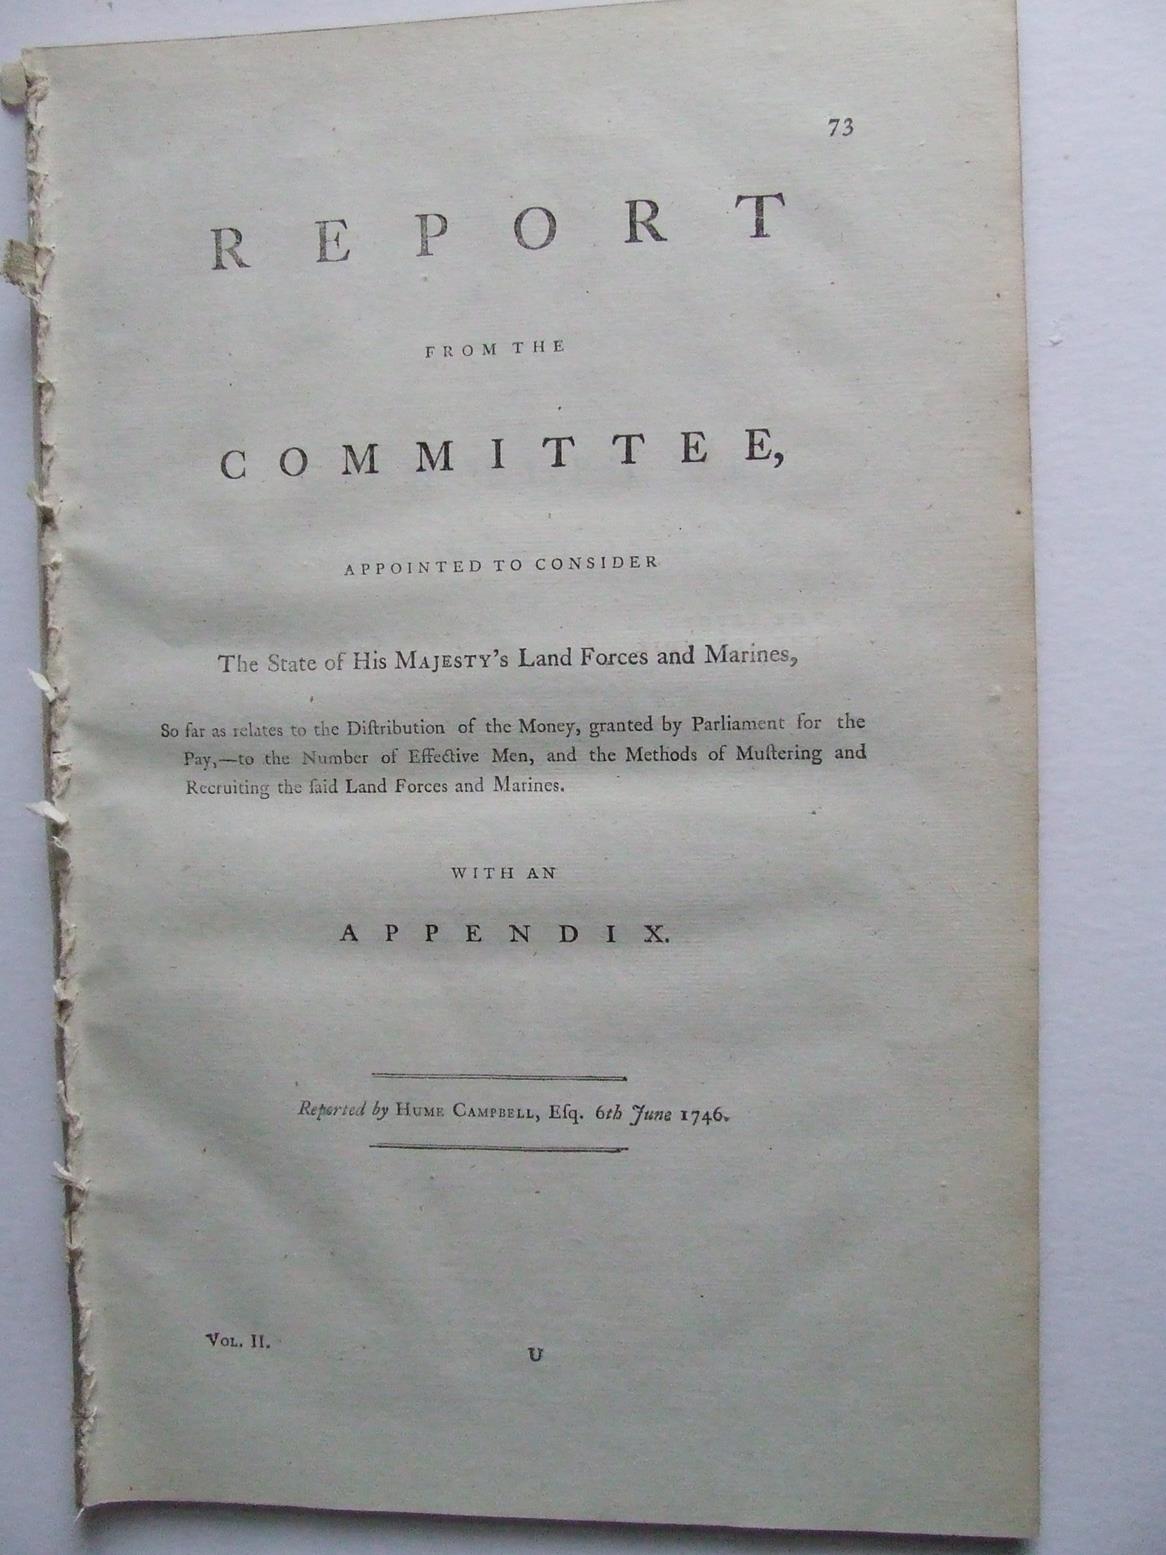 Report from the Committee, appointed to consider the state of His Majesty's Land Forces and Marines